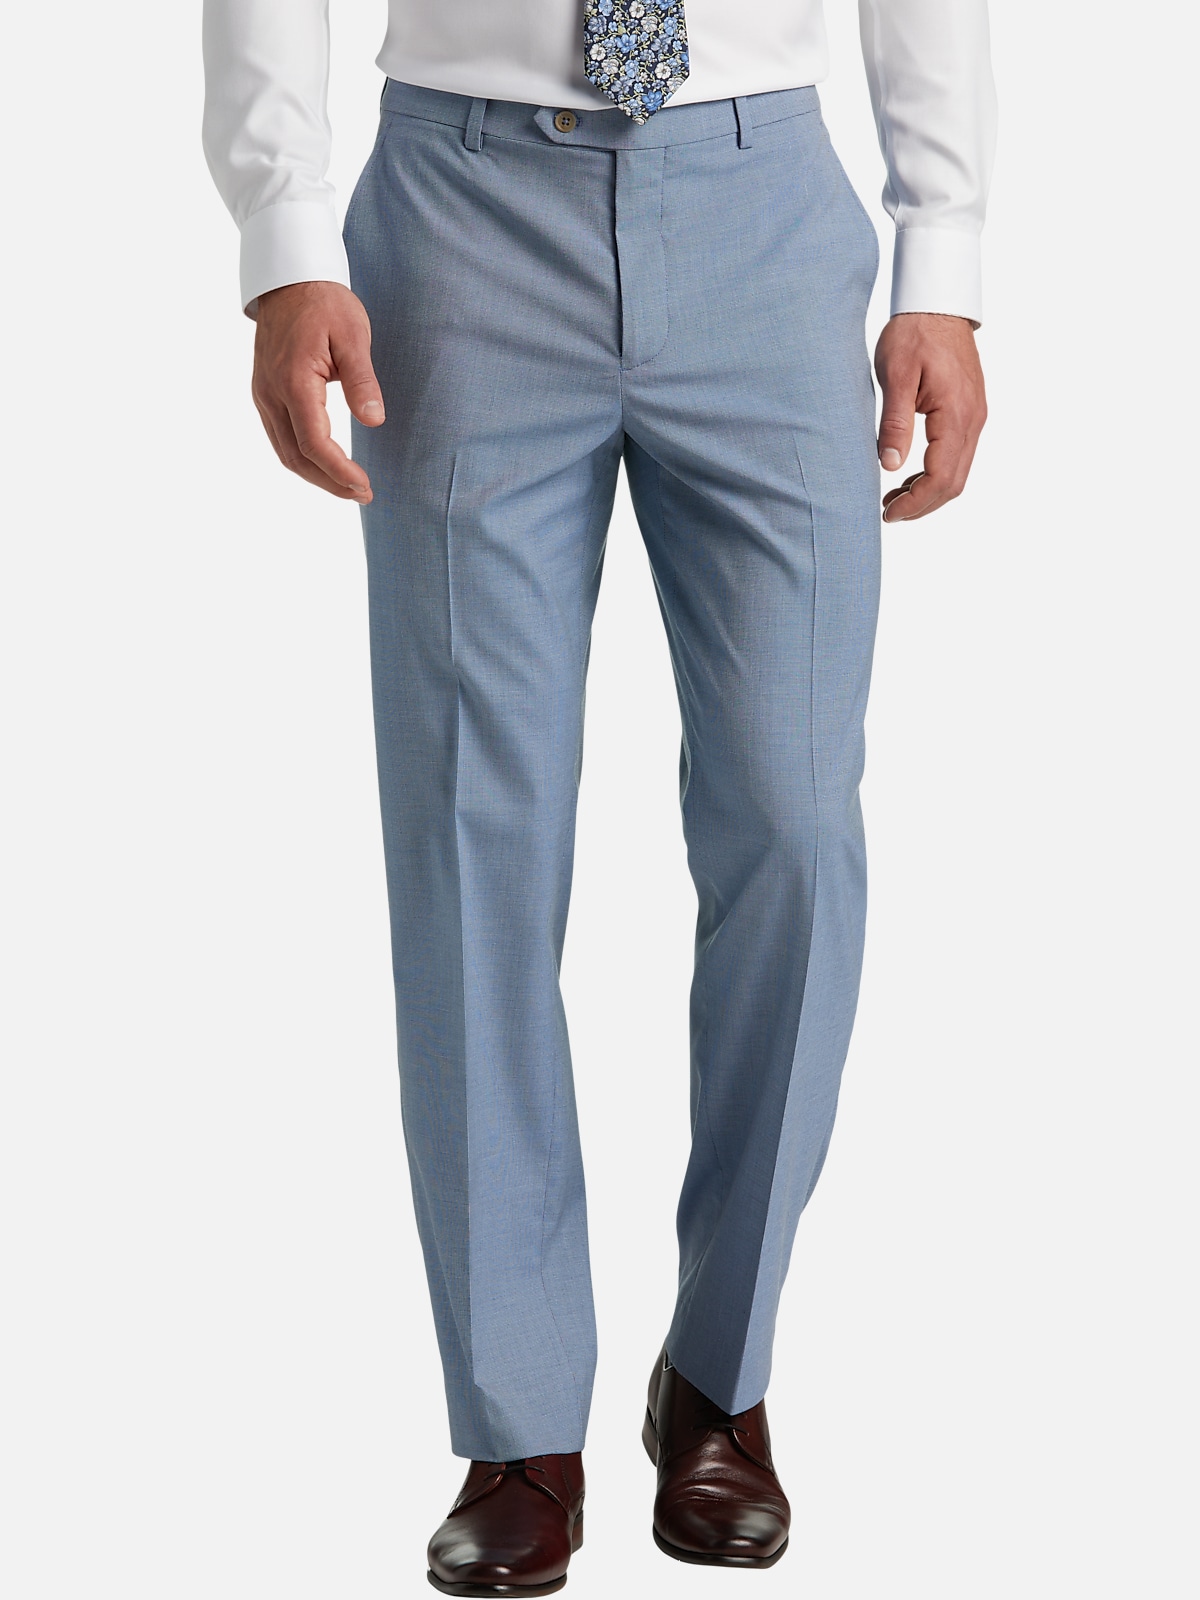 Awearness Kenneth Cole Modern Fit Performance Stretch Dress Pants | Men's  Pants | Moores Clothing